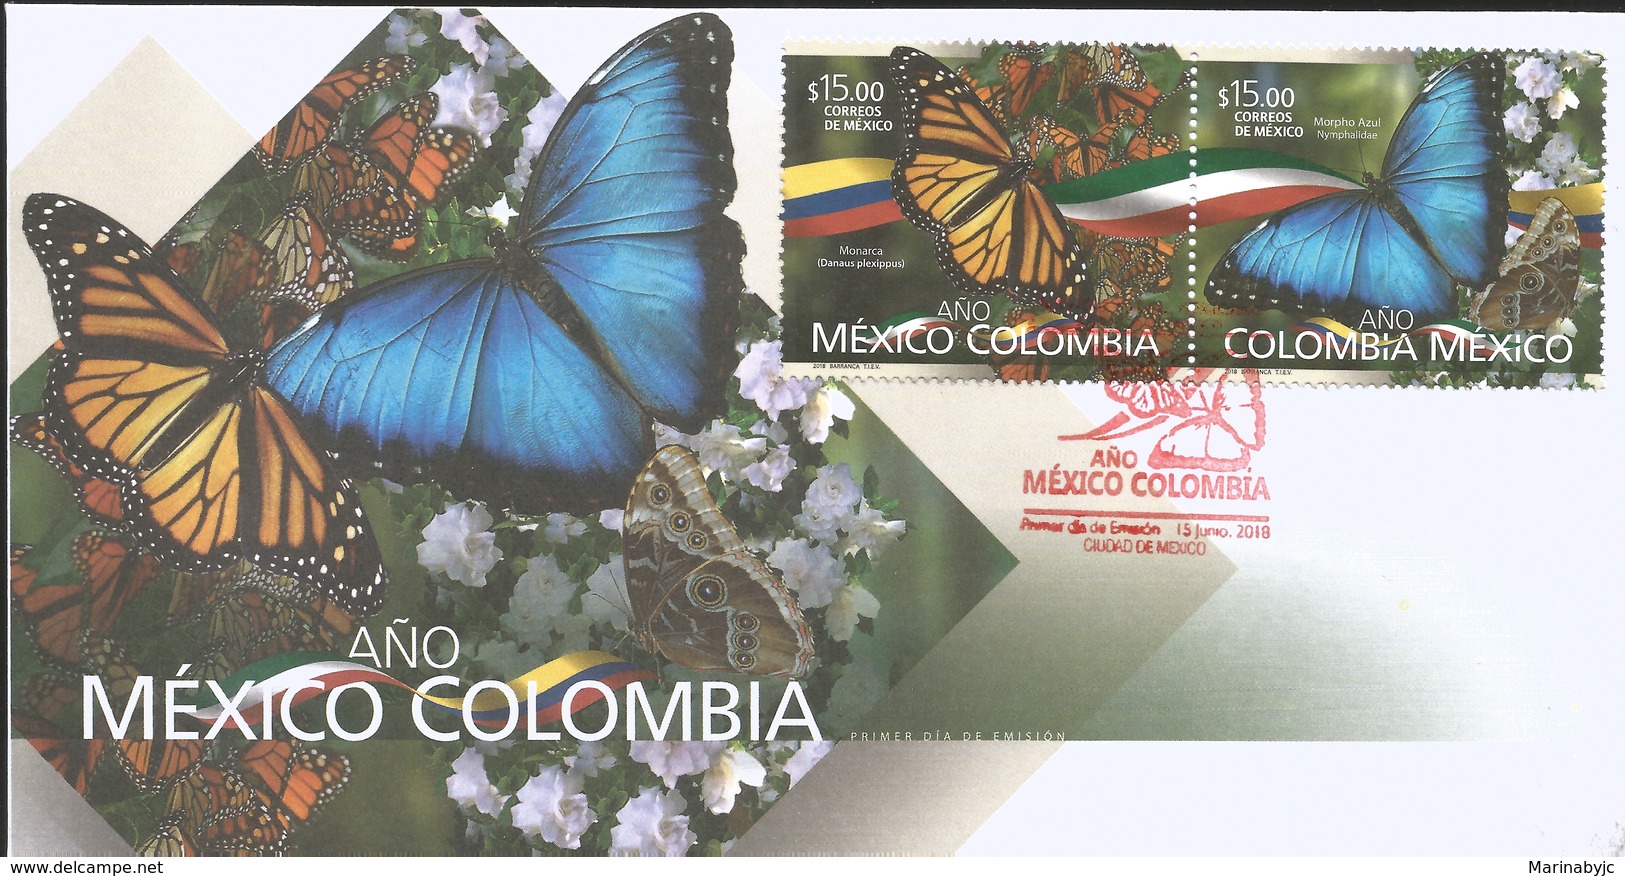 M) 2018, MEXICO, COLOMBIA - MEXICO YEAR, MONARCH BUTTERFLY, AND BLUE BUTTERFLY, FDC - Messico